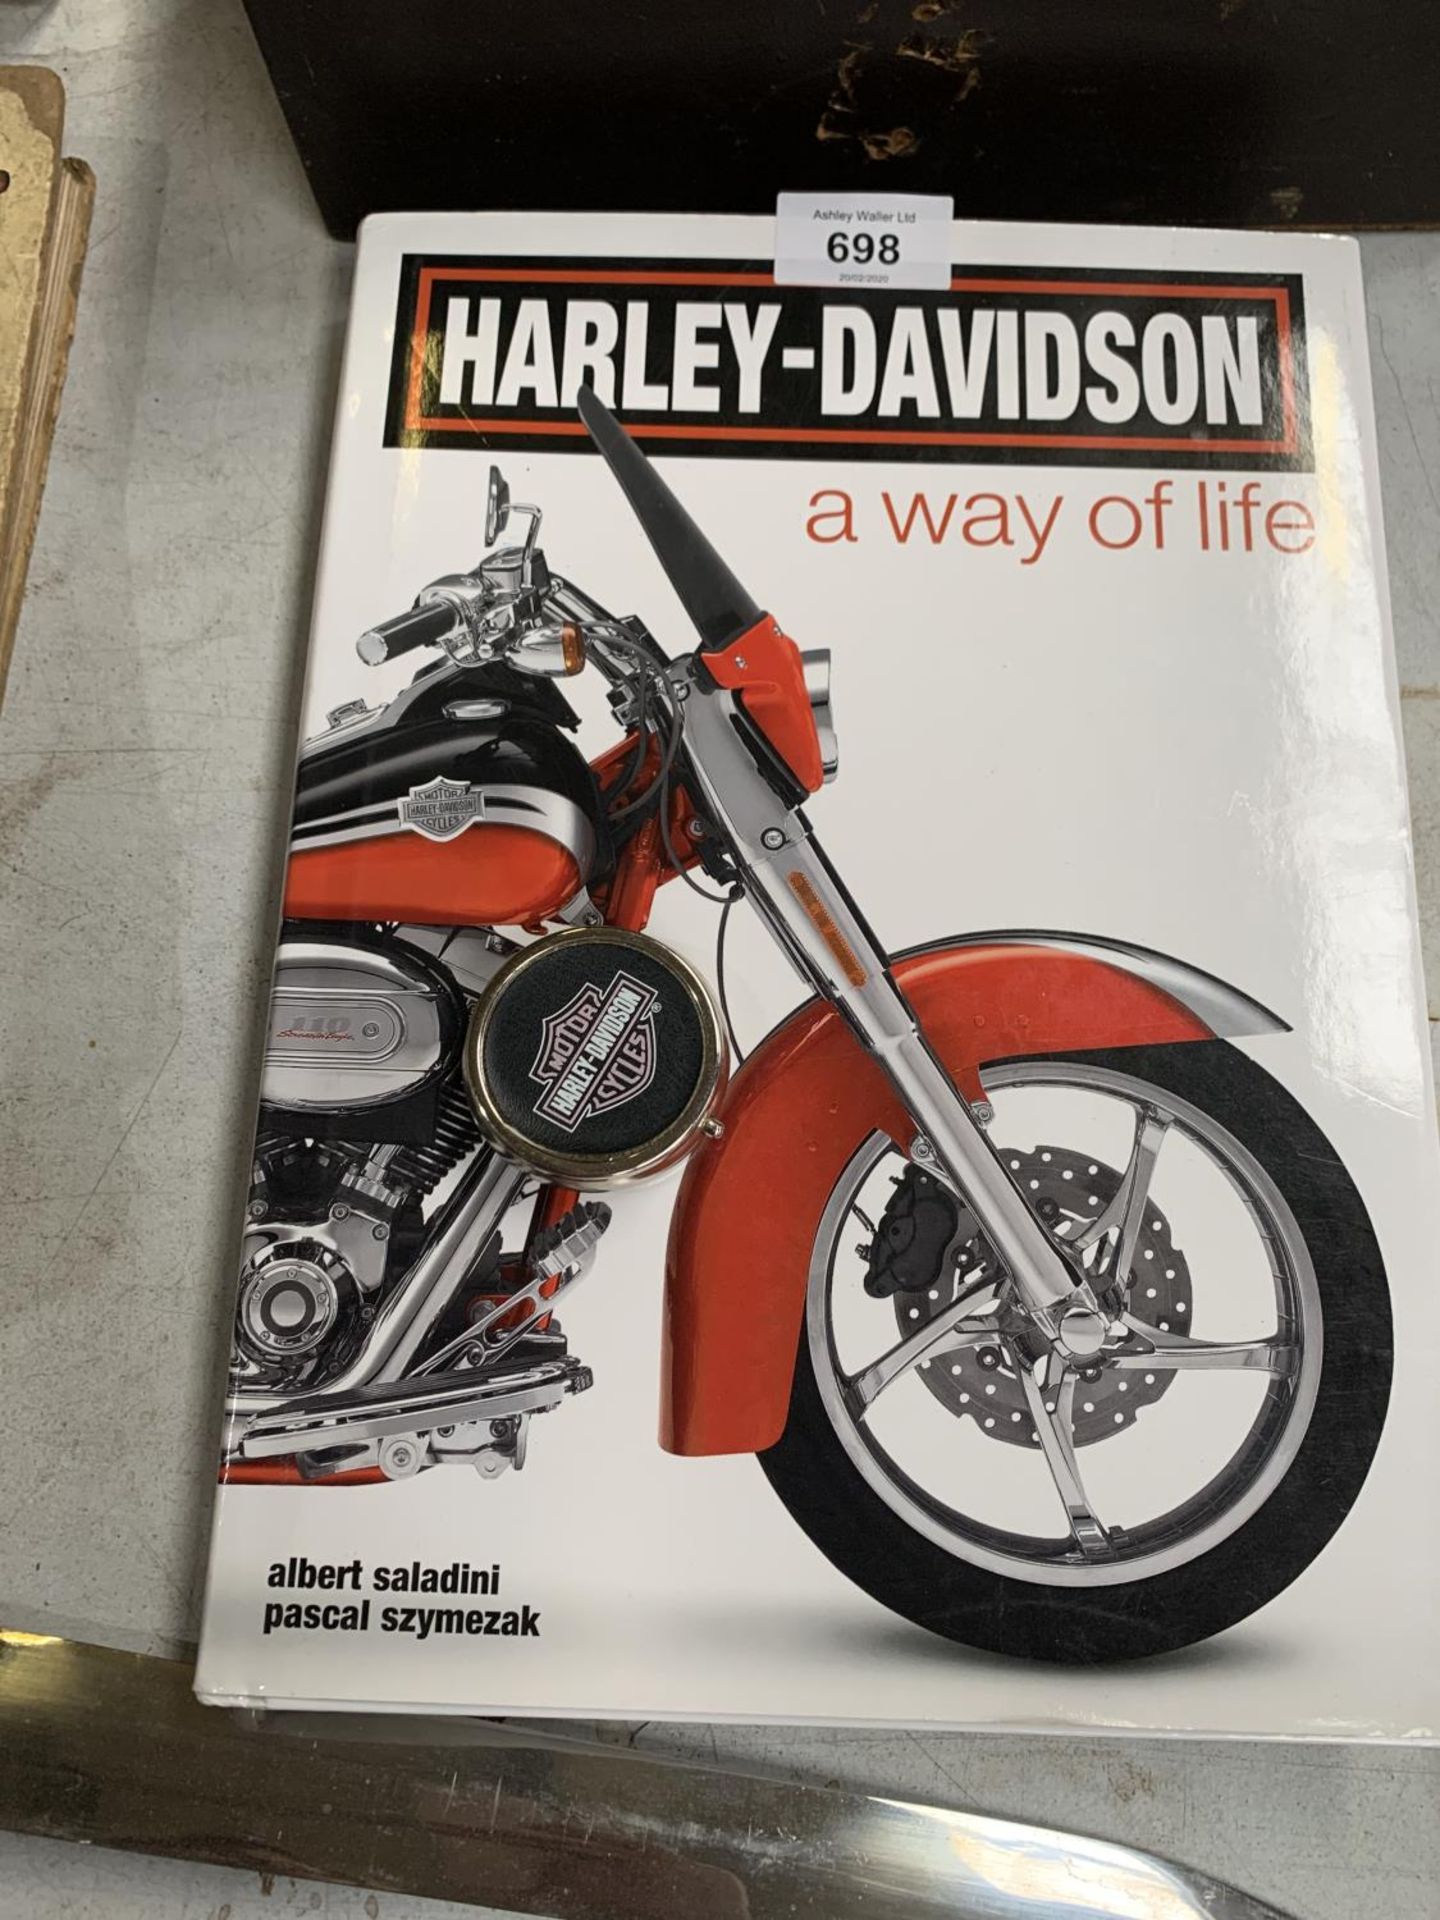 A COLLECTION OF HARLEY DAVISON MOTOR BIKE ITEMS TO INCLUDE- BOOK, LICENSE TAG FRAME AND BADGE - Image 2 of 2